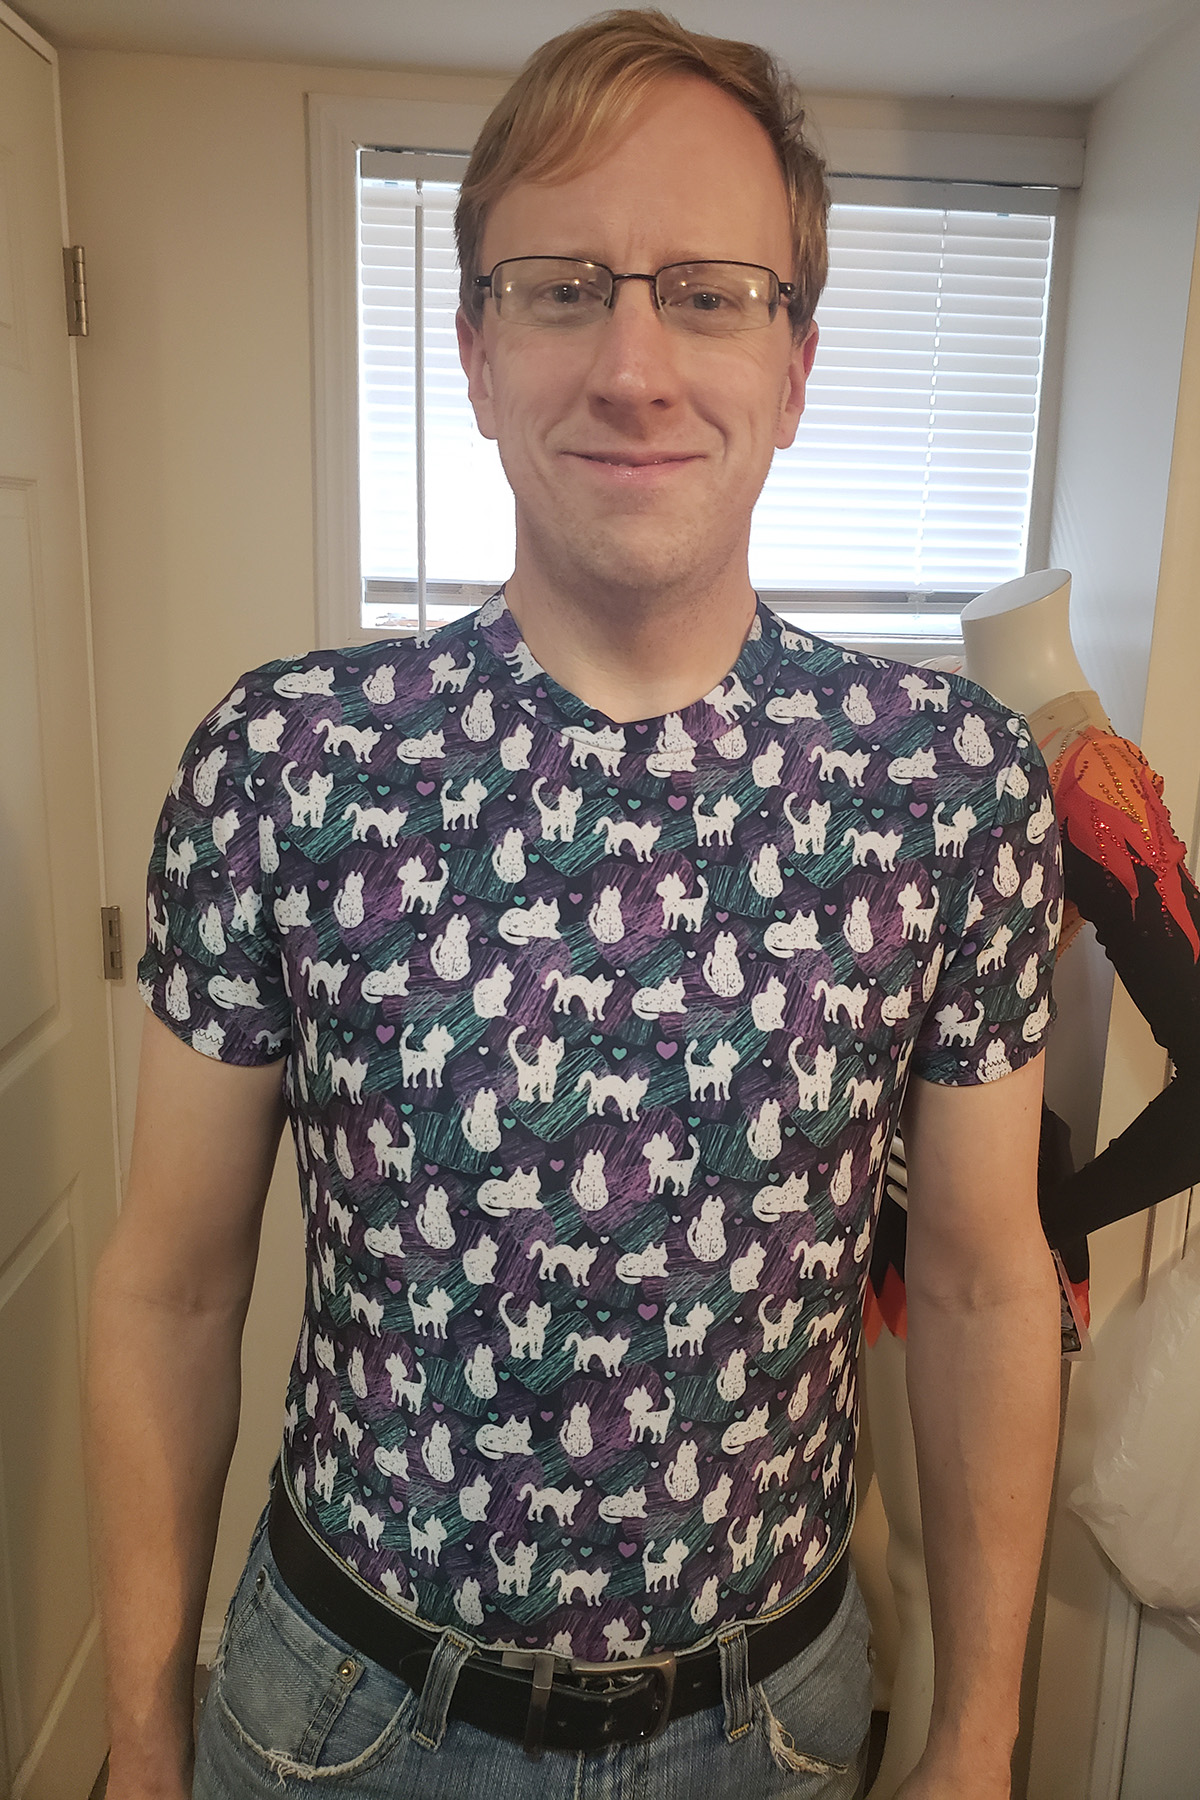 A middle aged blond man wearing a cat print spandex shirt.